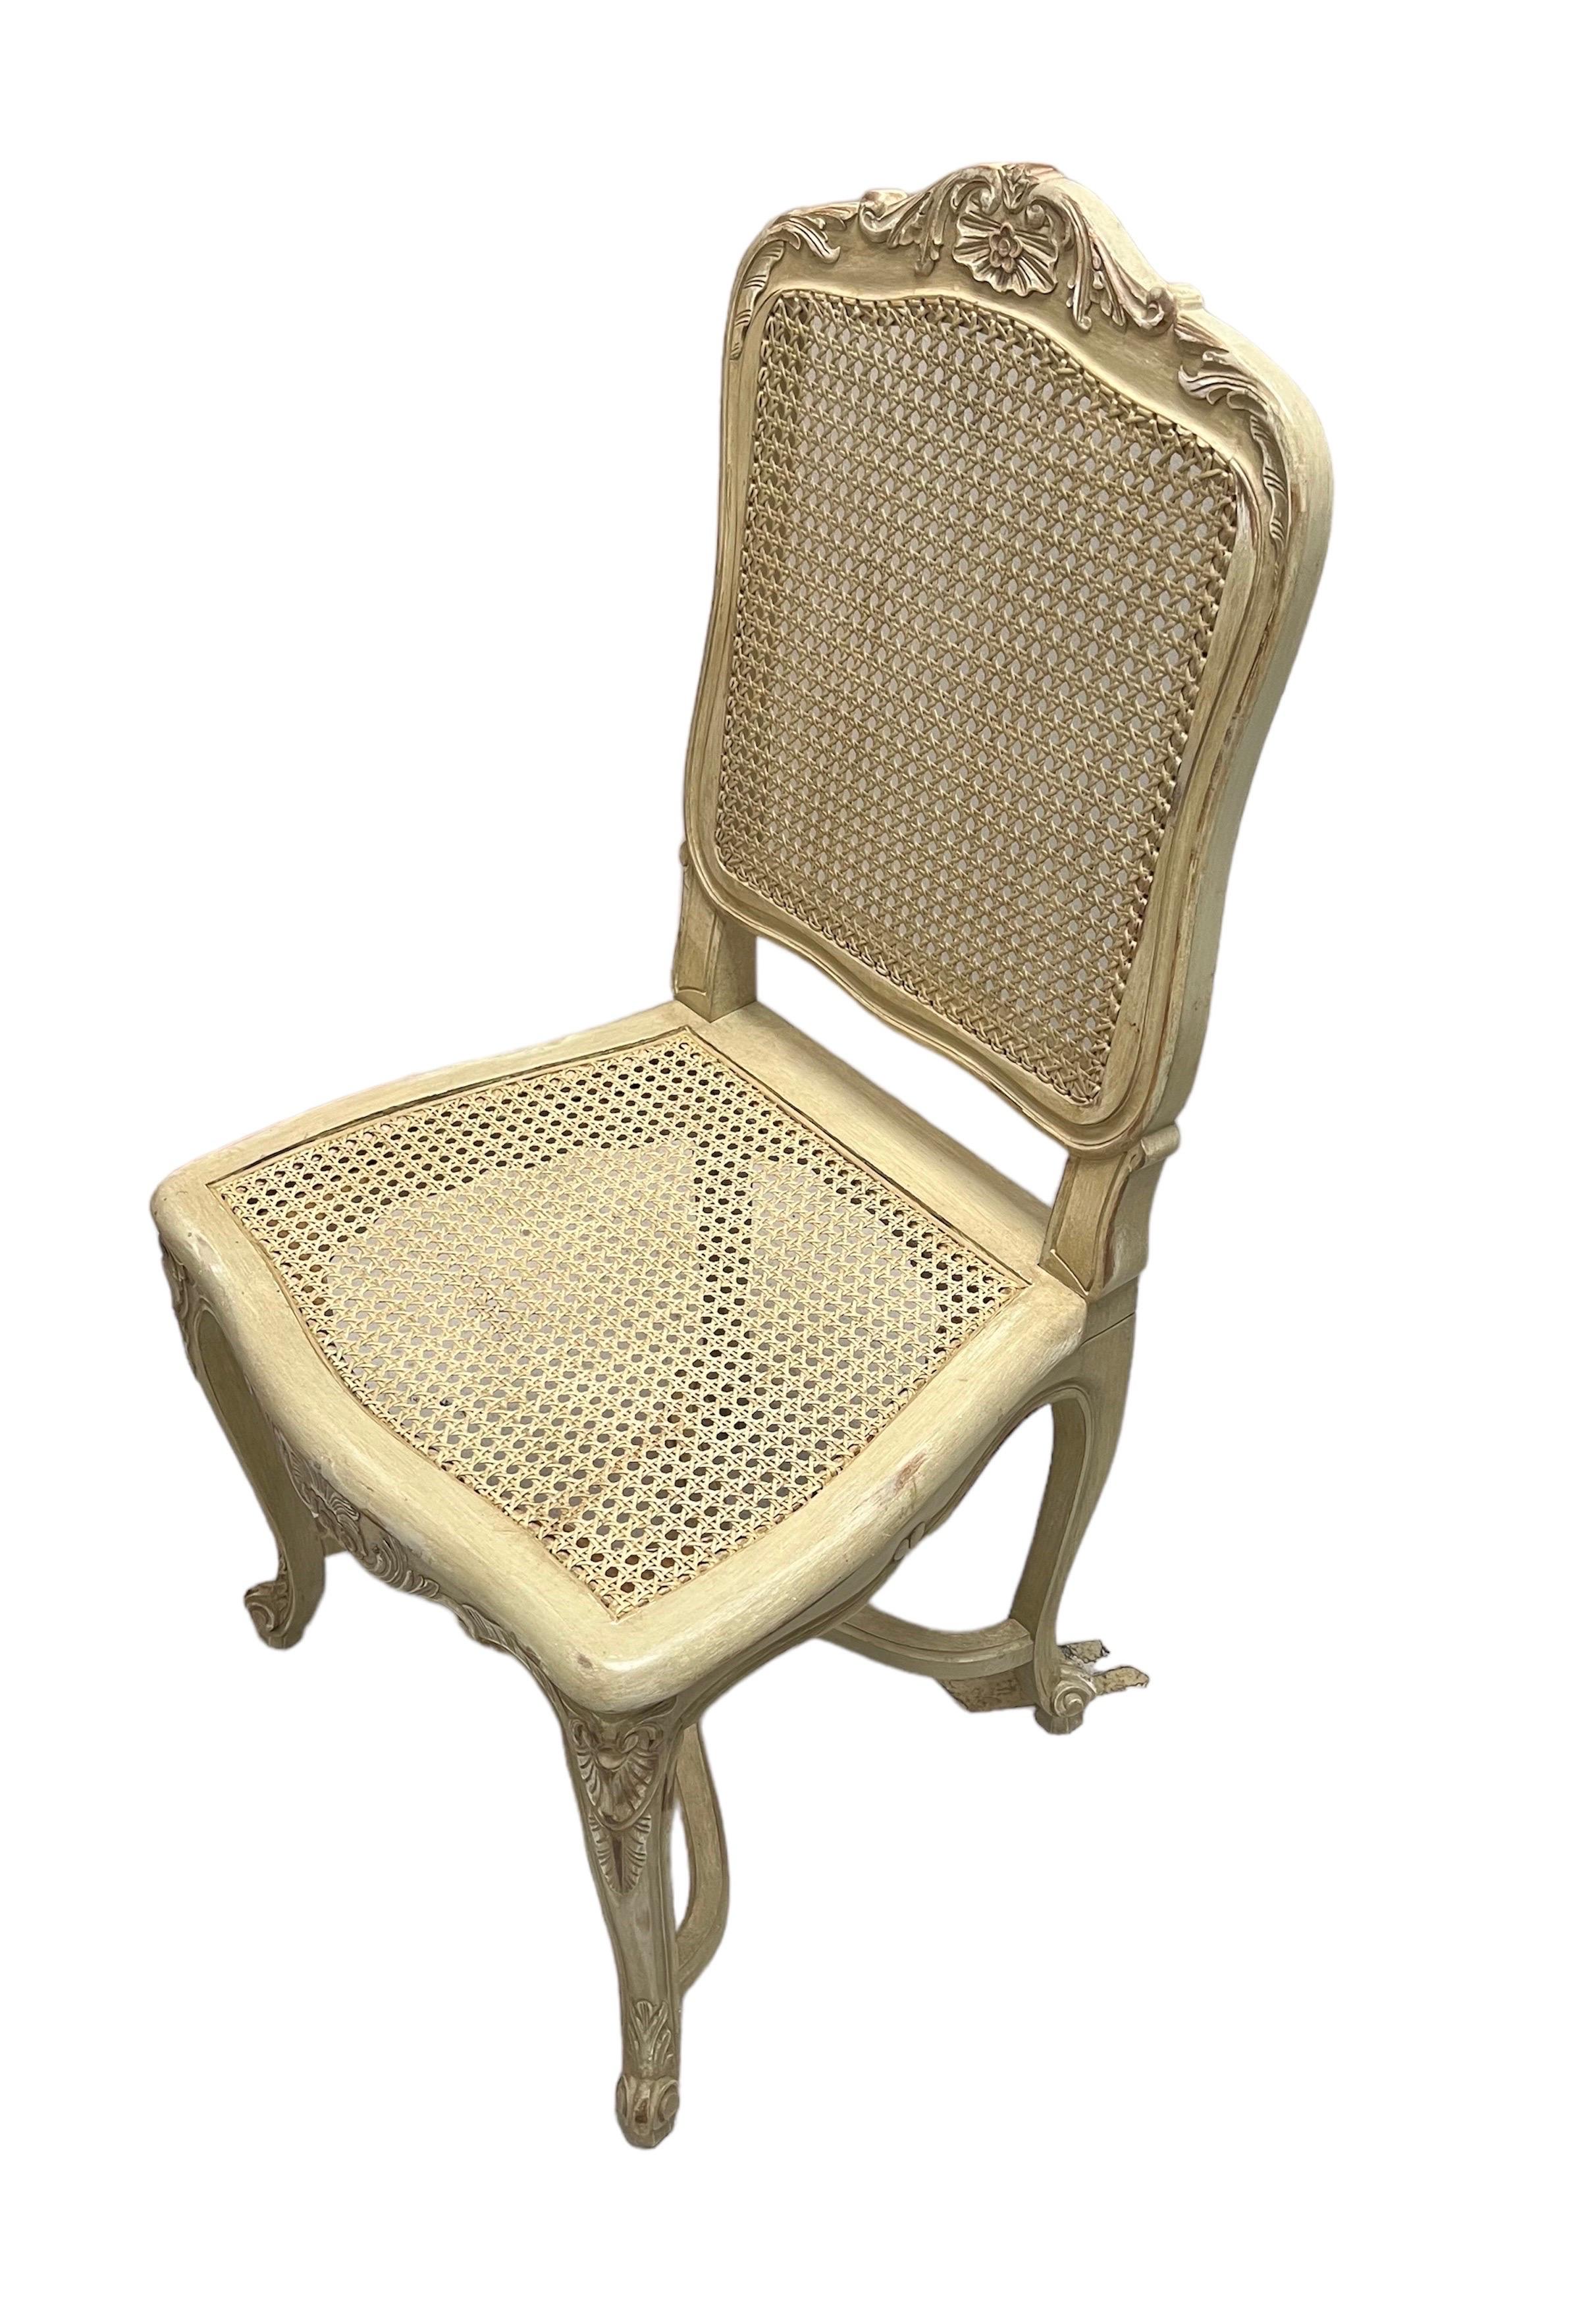 English Caned & Painted Régence Style Chairs, 2 Arm 10 Side  For Sale